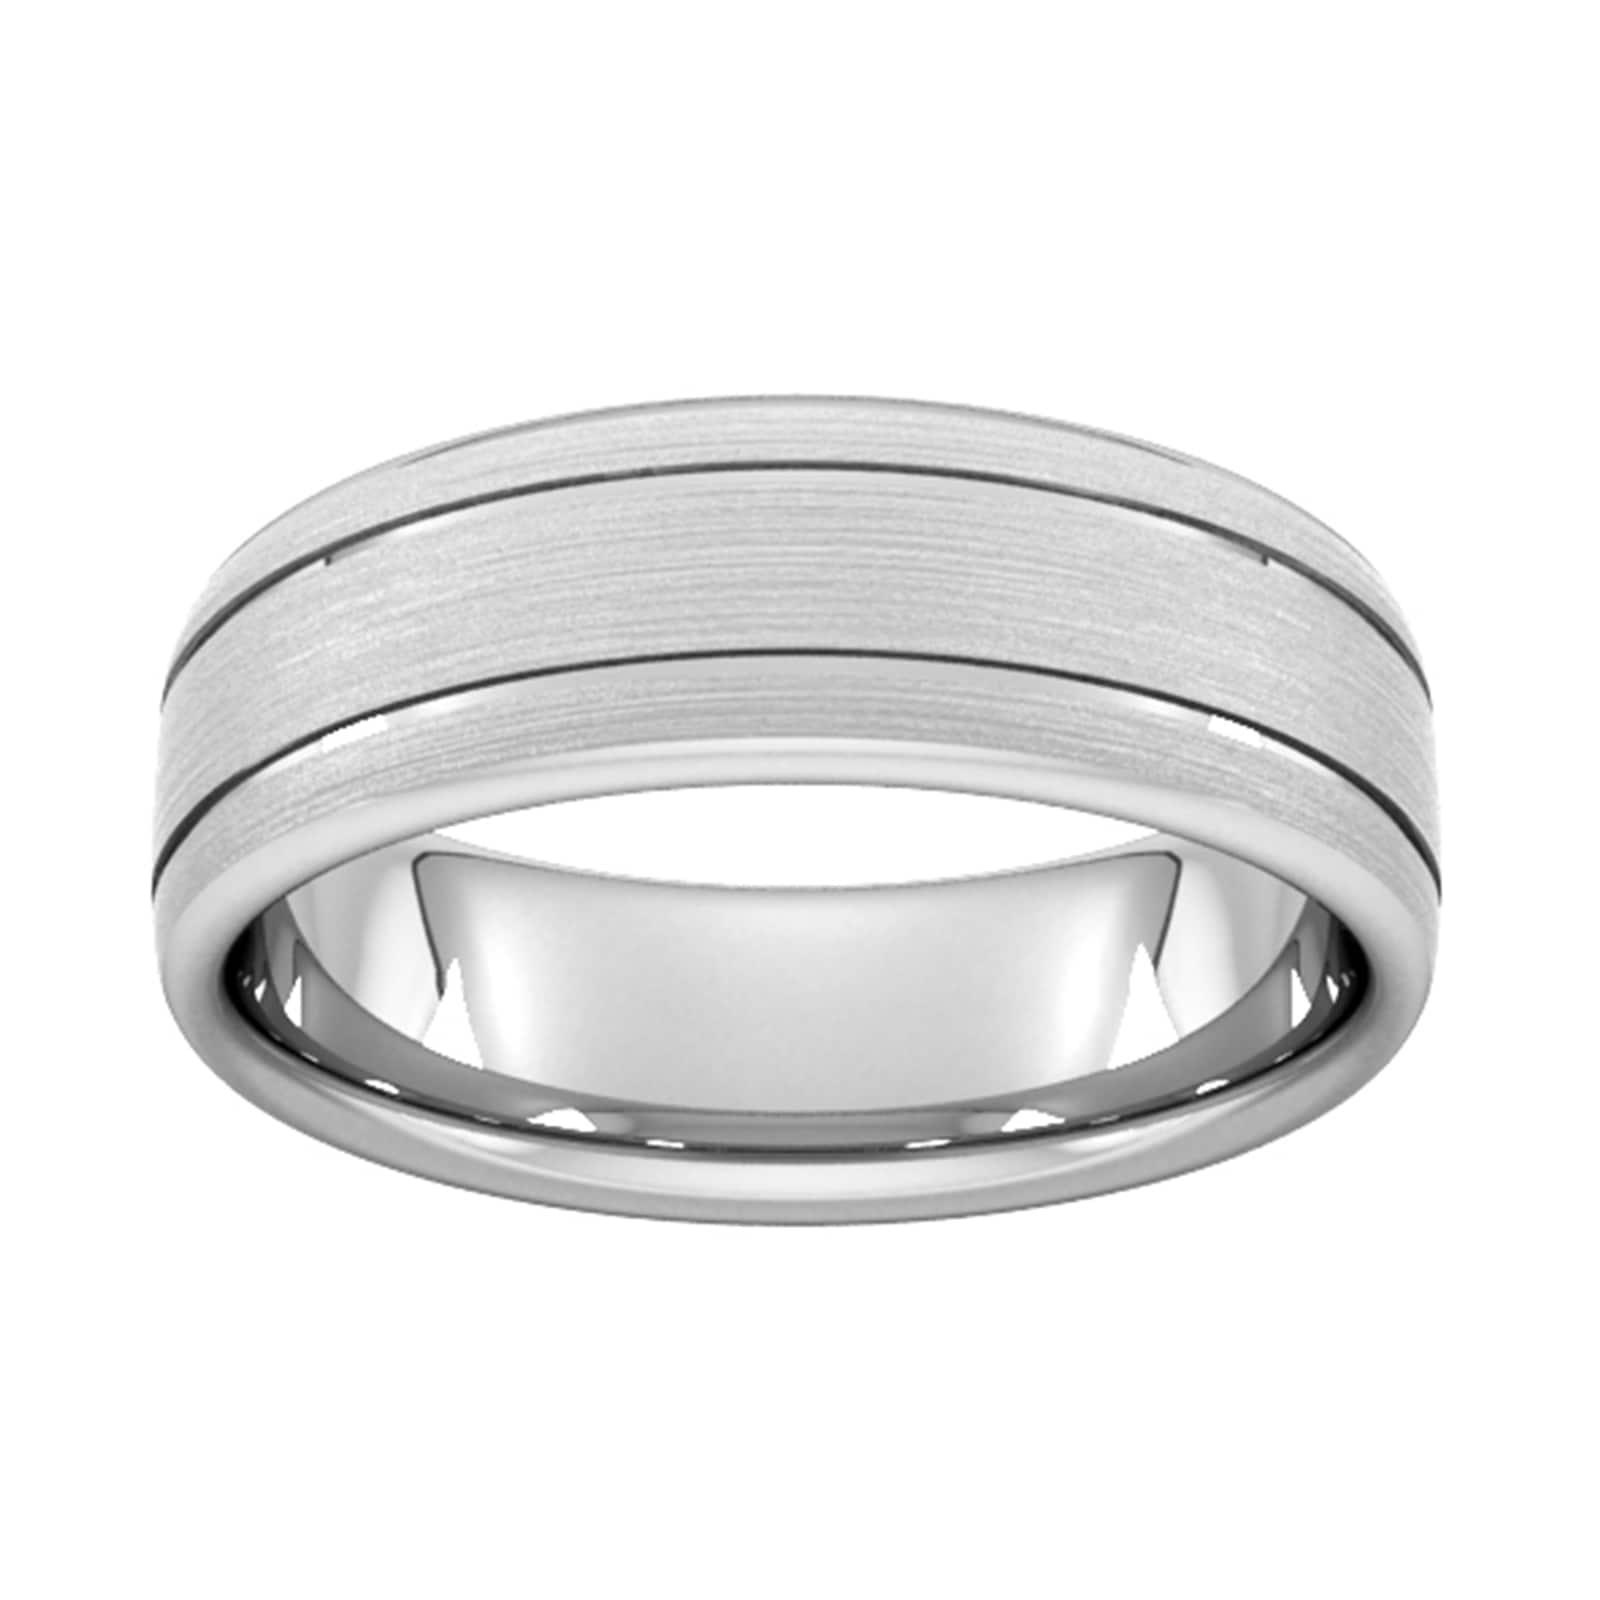 7mm Slight Court Standard Matt Finish With Double Grooves Wedding Ring In 9 Carat White Gold - Ring Size L